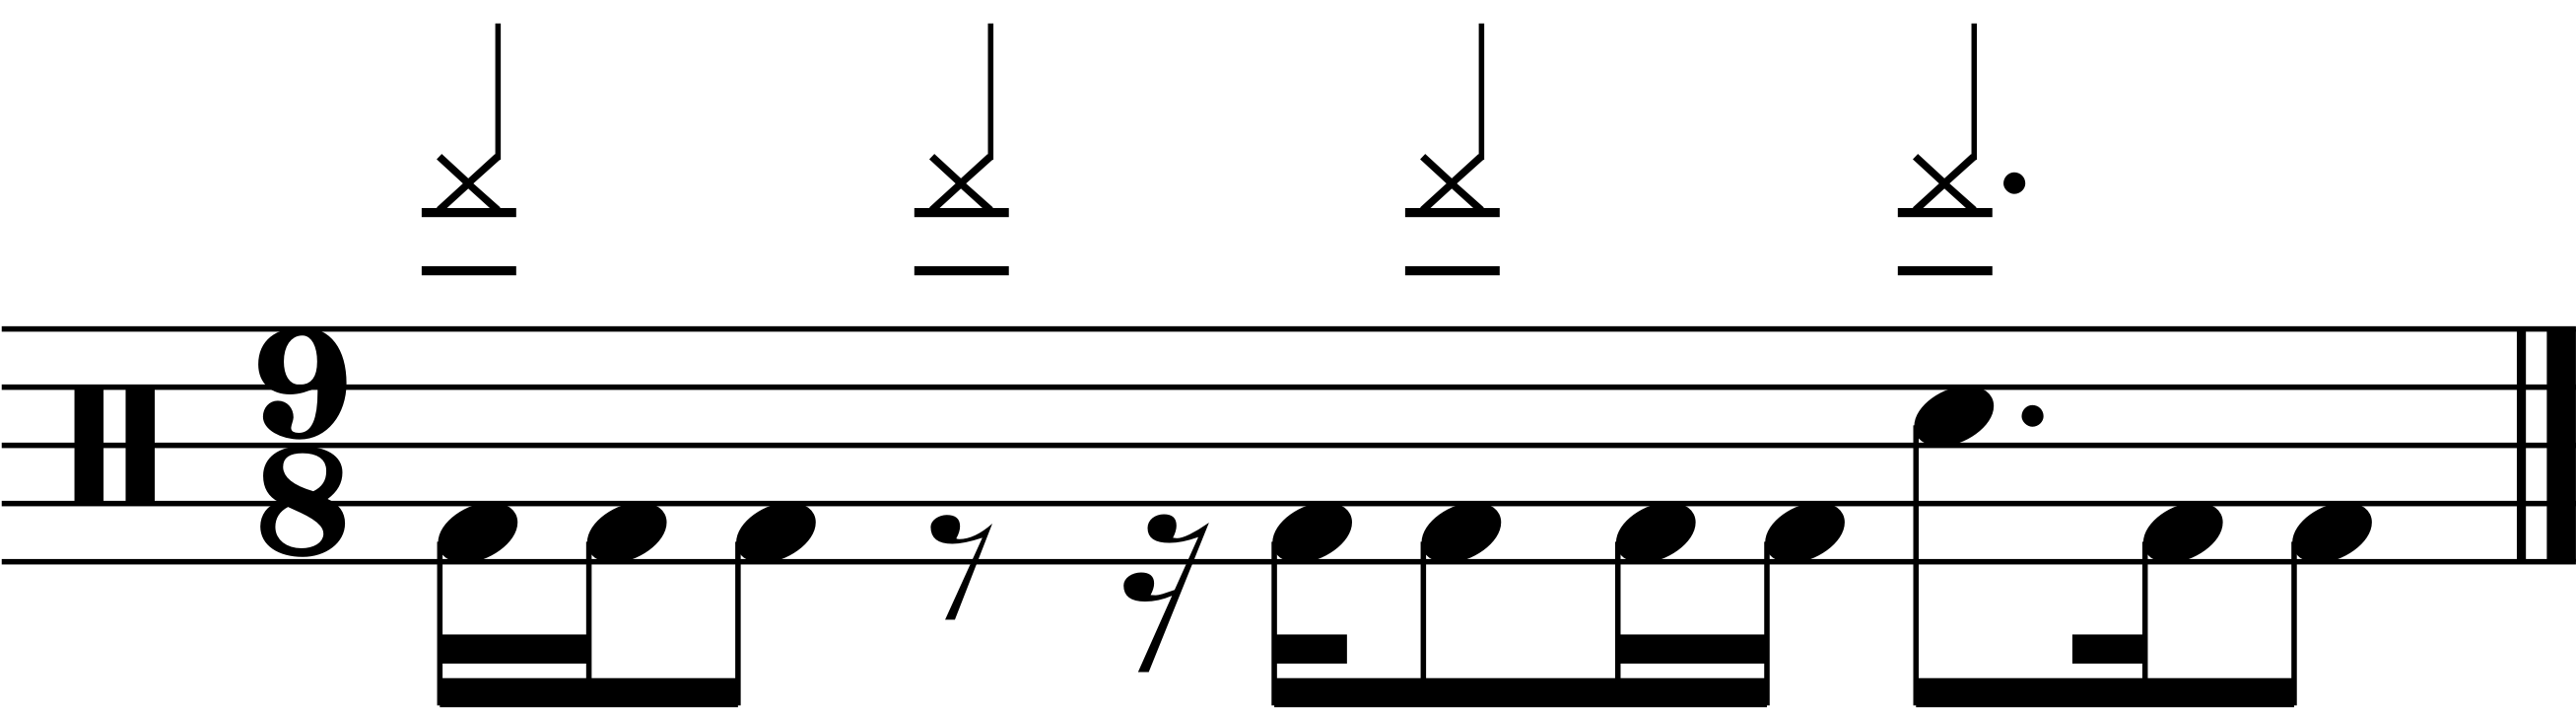 A free groove lesson in 9/8 with a specific snare placement